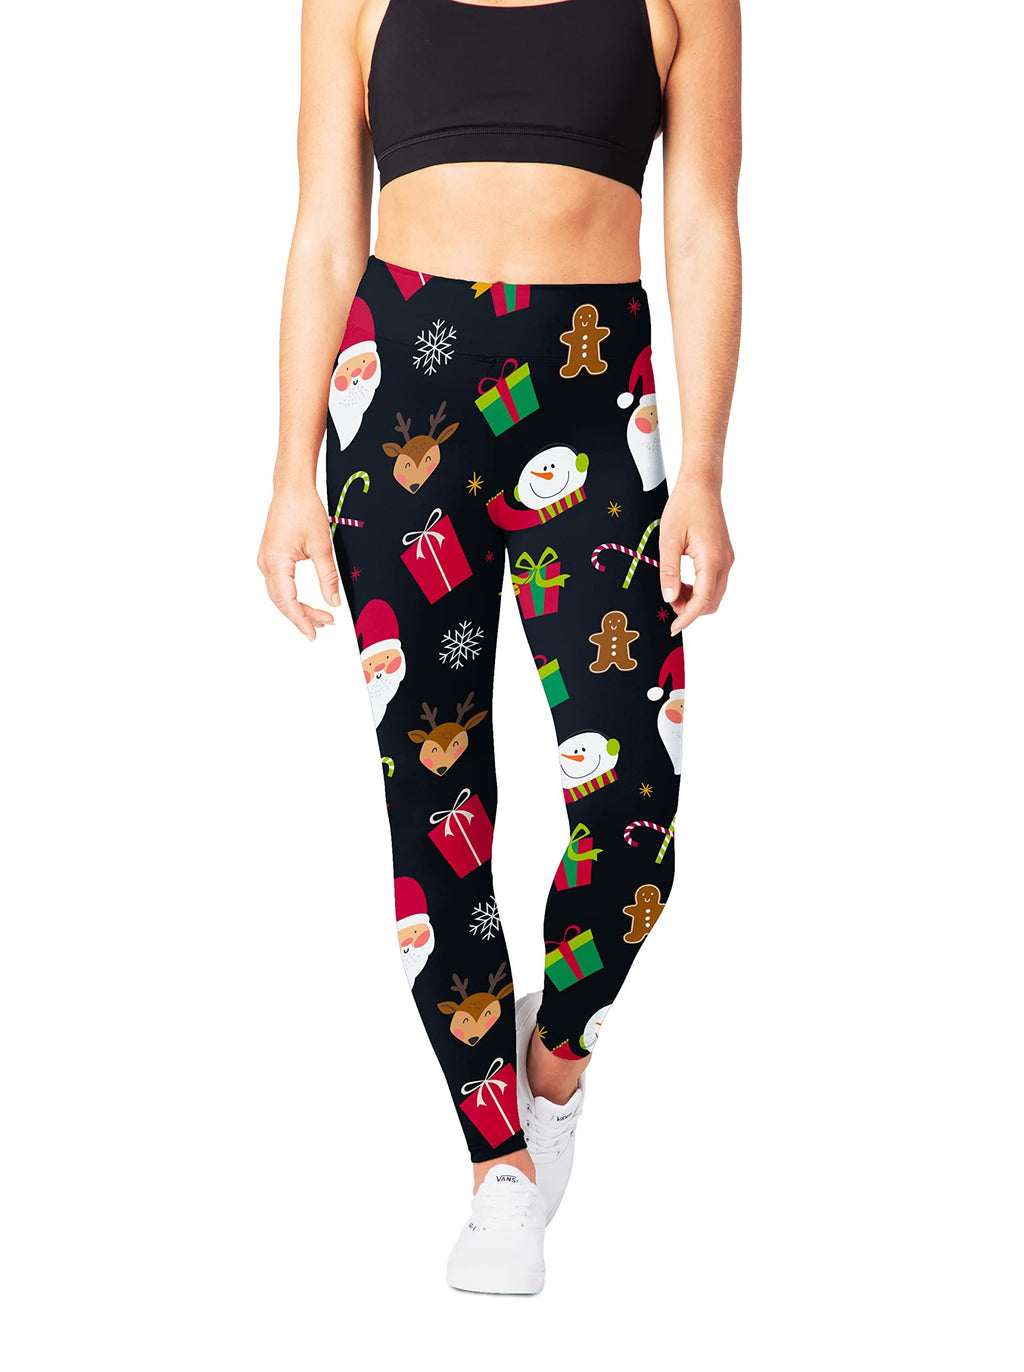 SATINA High Waisted Leggings with Pockets for Women - Workout Leggings